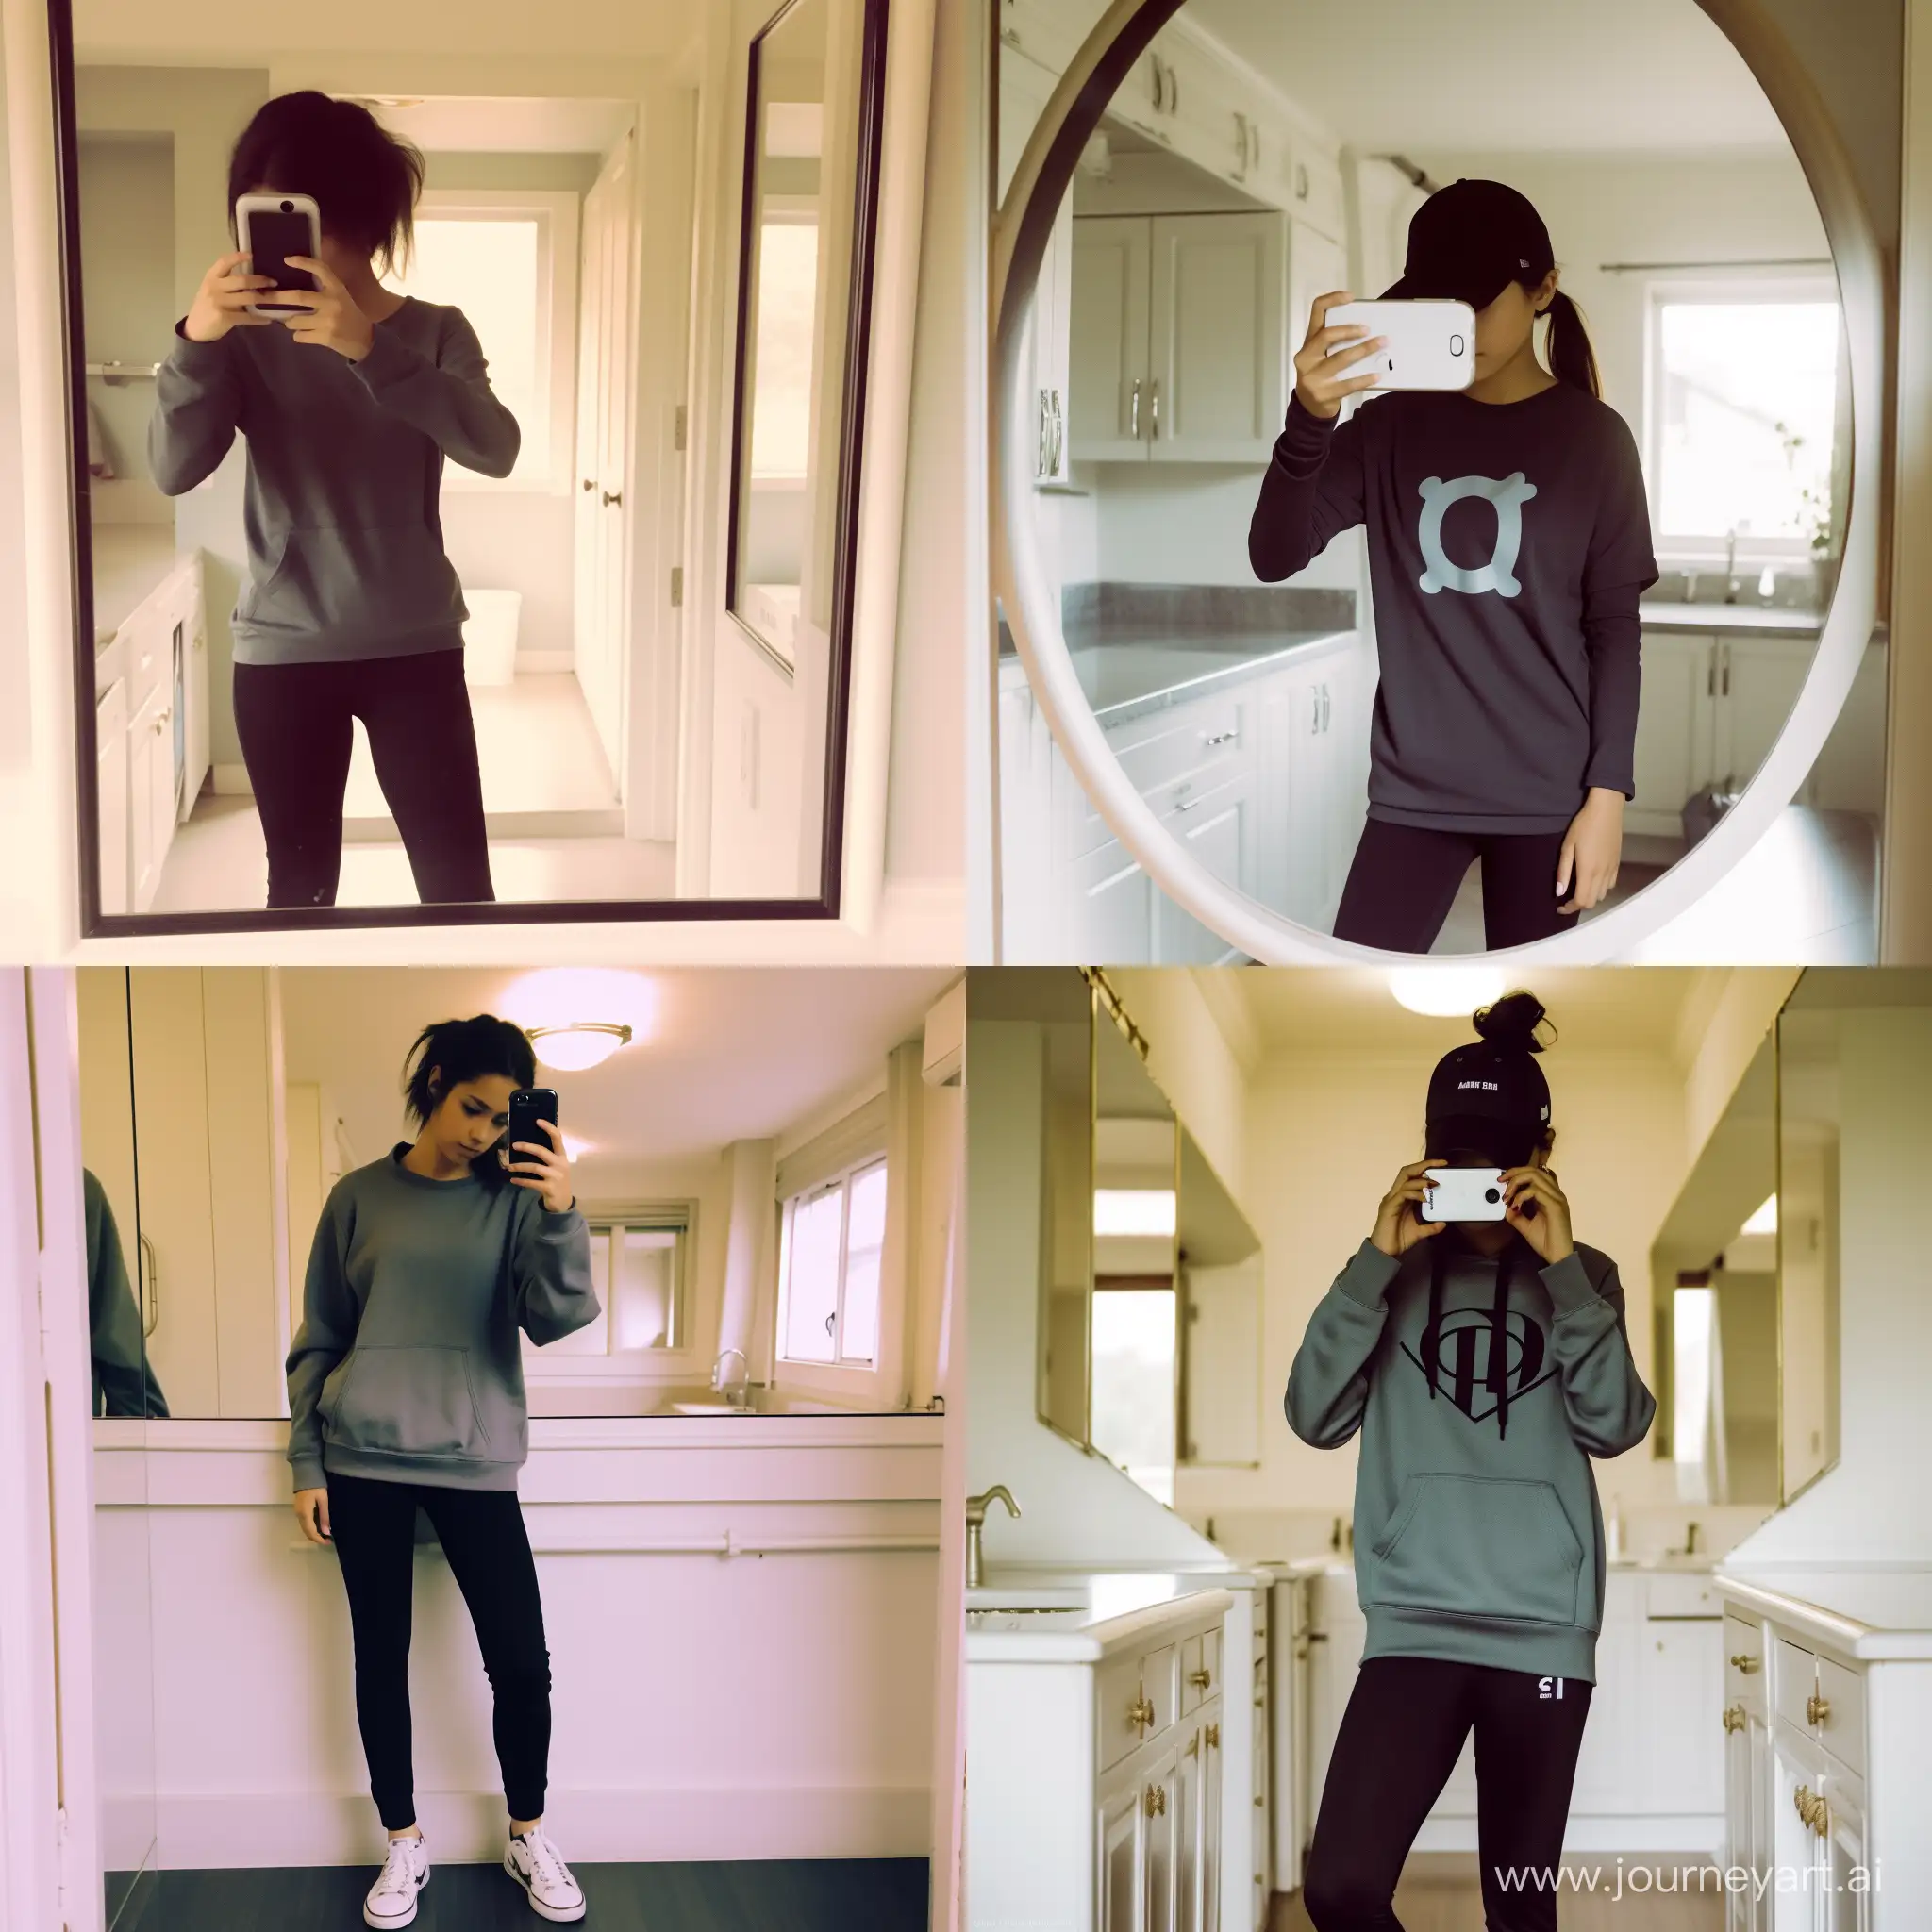 Stylish-Selfie-Moment-19YearOld-Girl-Captures-Glamorous-Reflection-at-Home